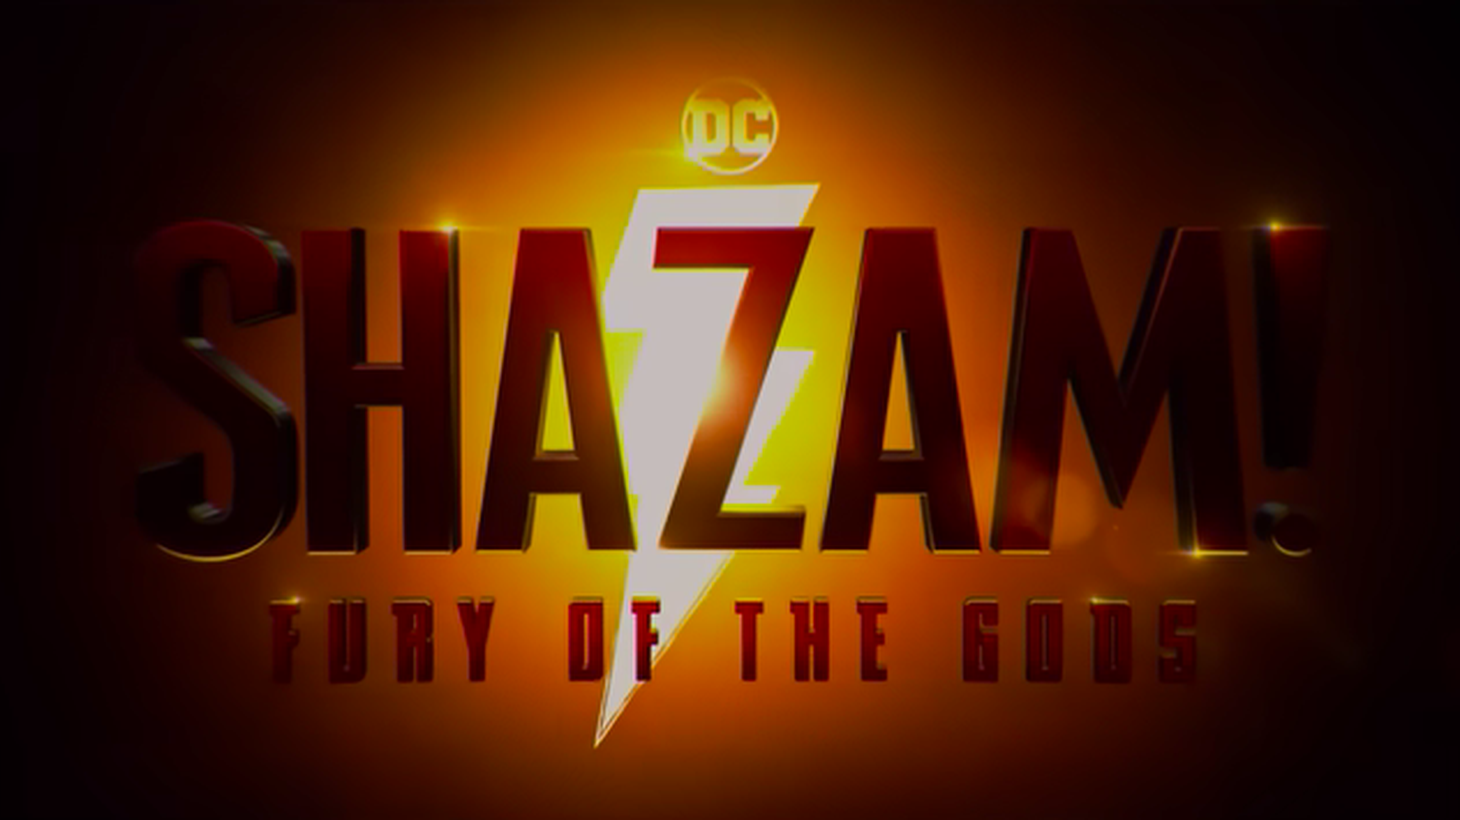 In this sequel, Shazam and his superhero allies face off against three ancient gods who are searching the Earth for magic they say was stolen from them long ago.